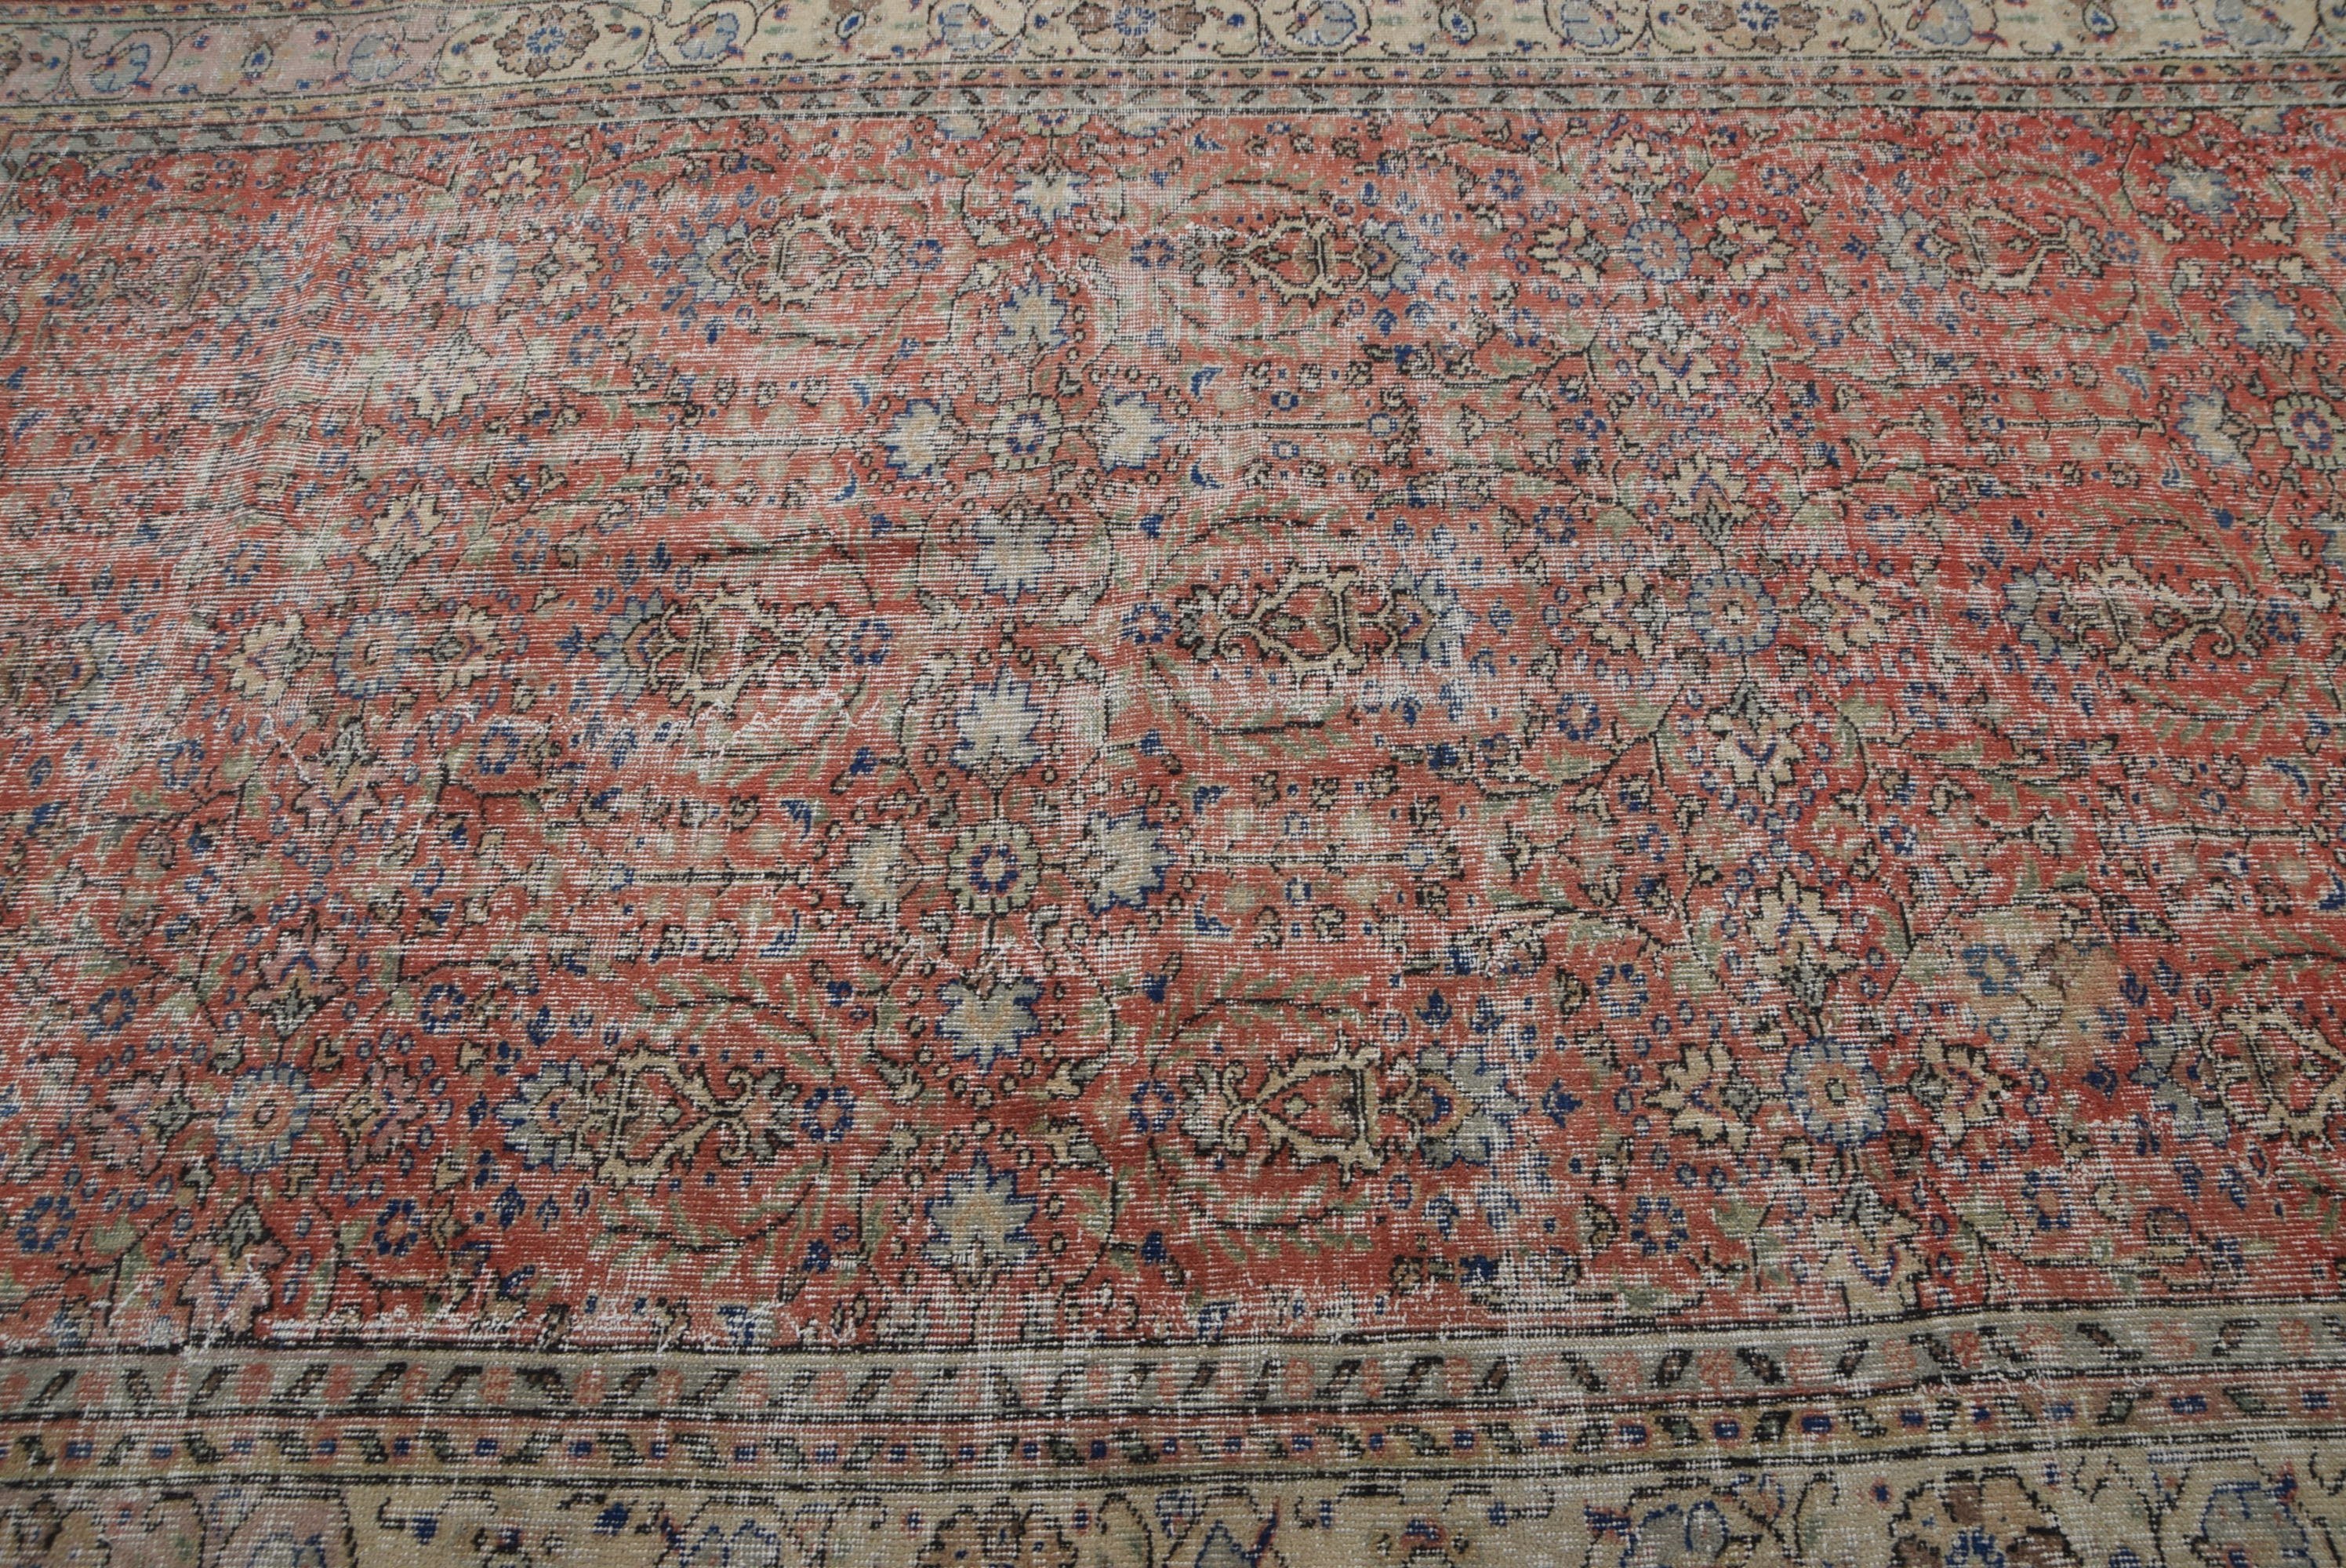 Living Room Rug, Turkish Rugs, Moroccan Rug, Red Kitchen Rugs, Dining Room Rug, Vintage Rug, Anatolian Rugs, 6.4x10.2 ft Large Rugs